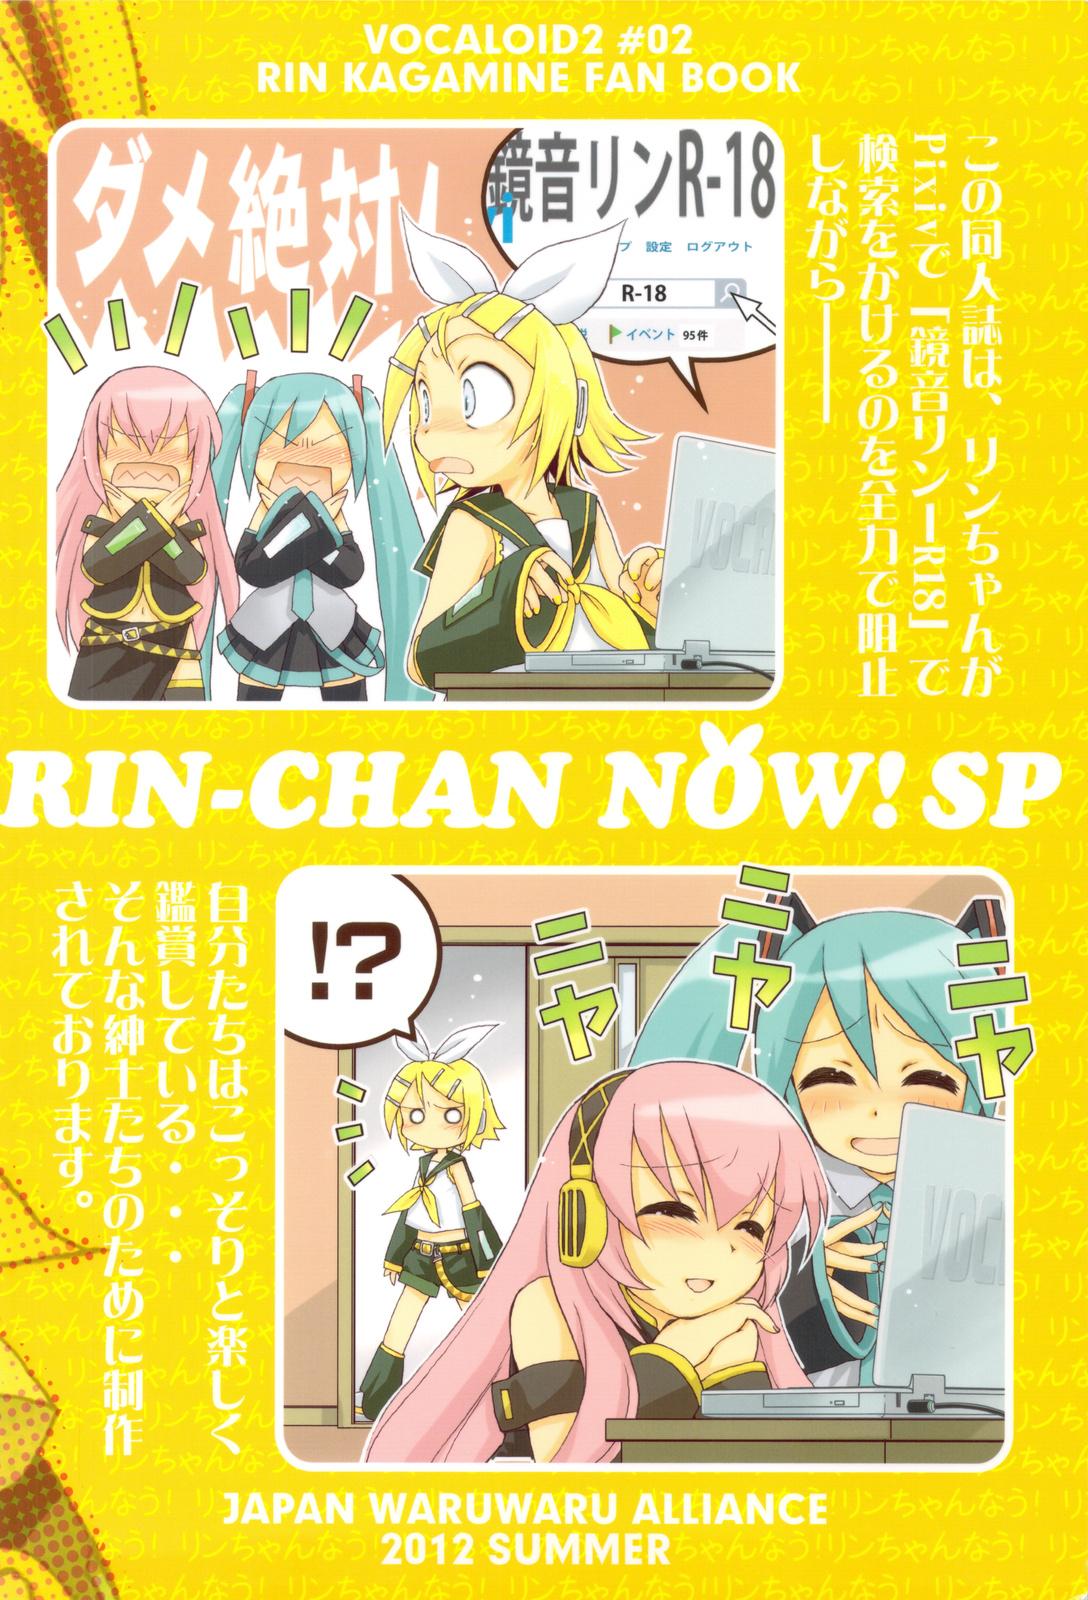 Black Woman Rin-chan Now! SP - Vocaloid Zorra - Page 24